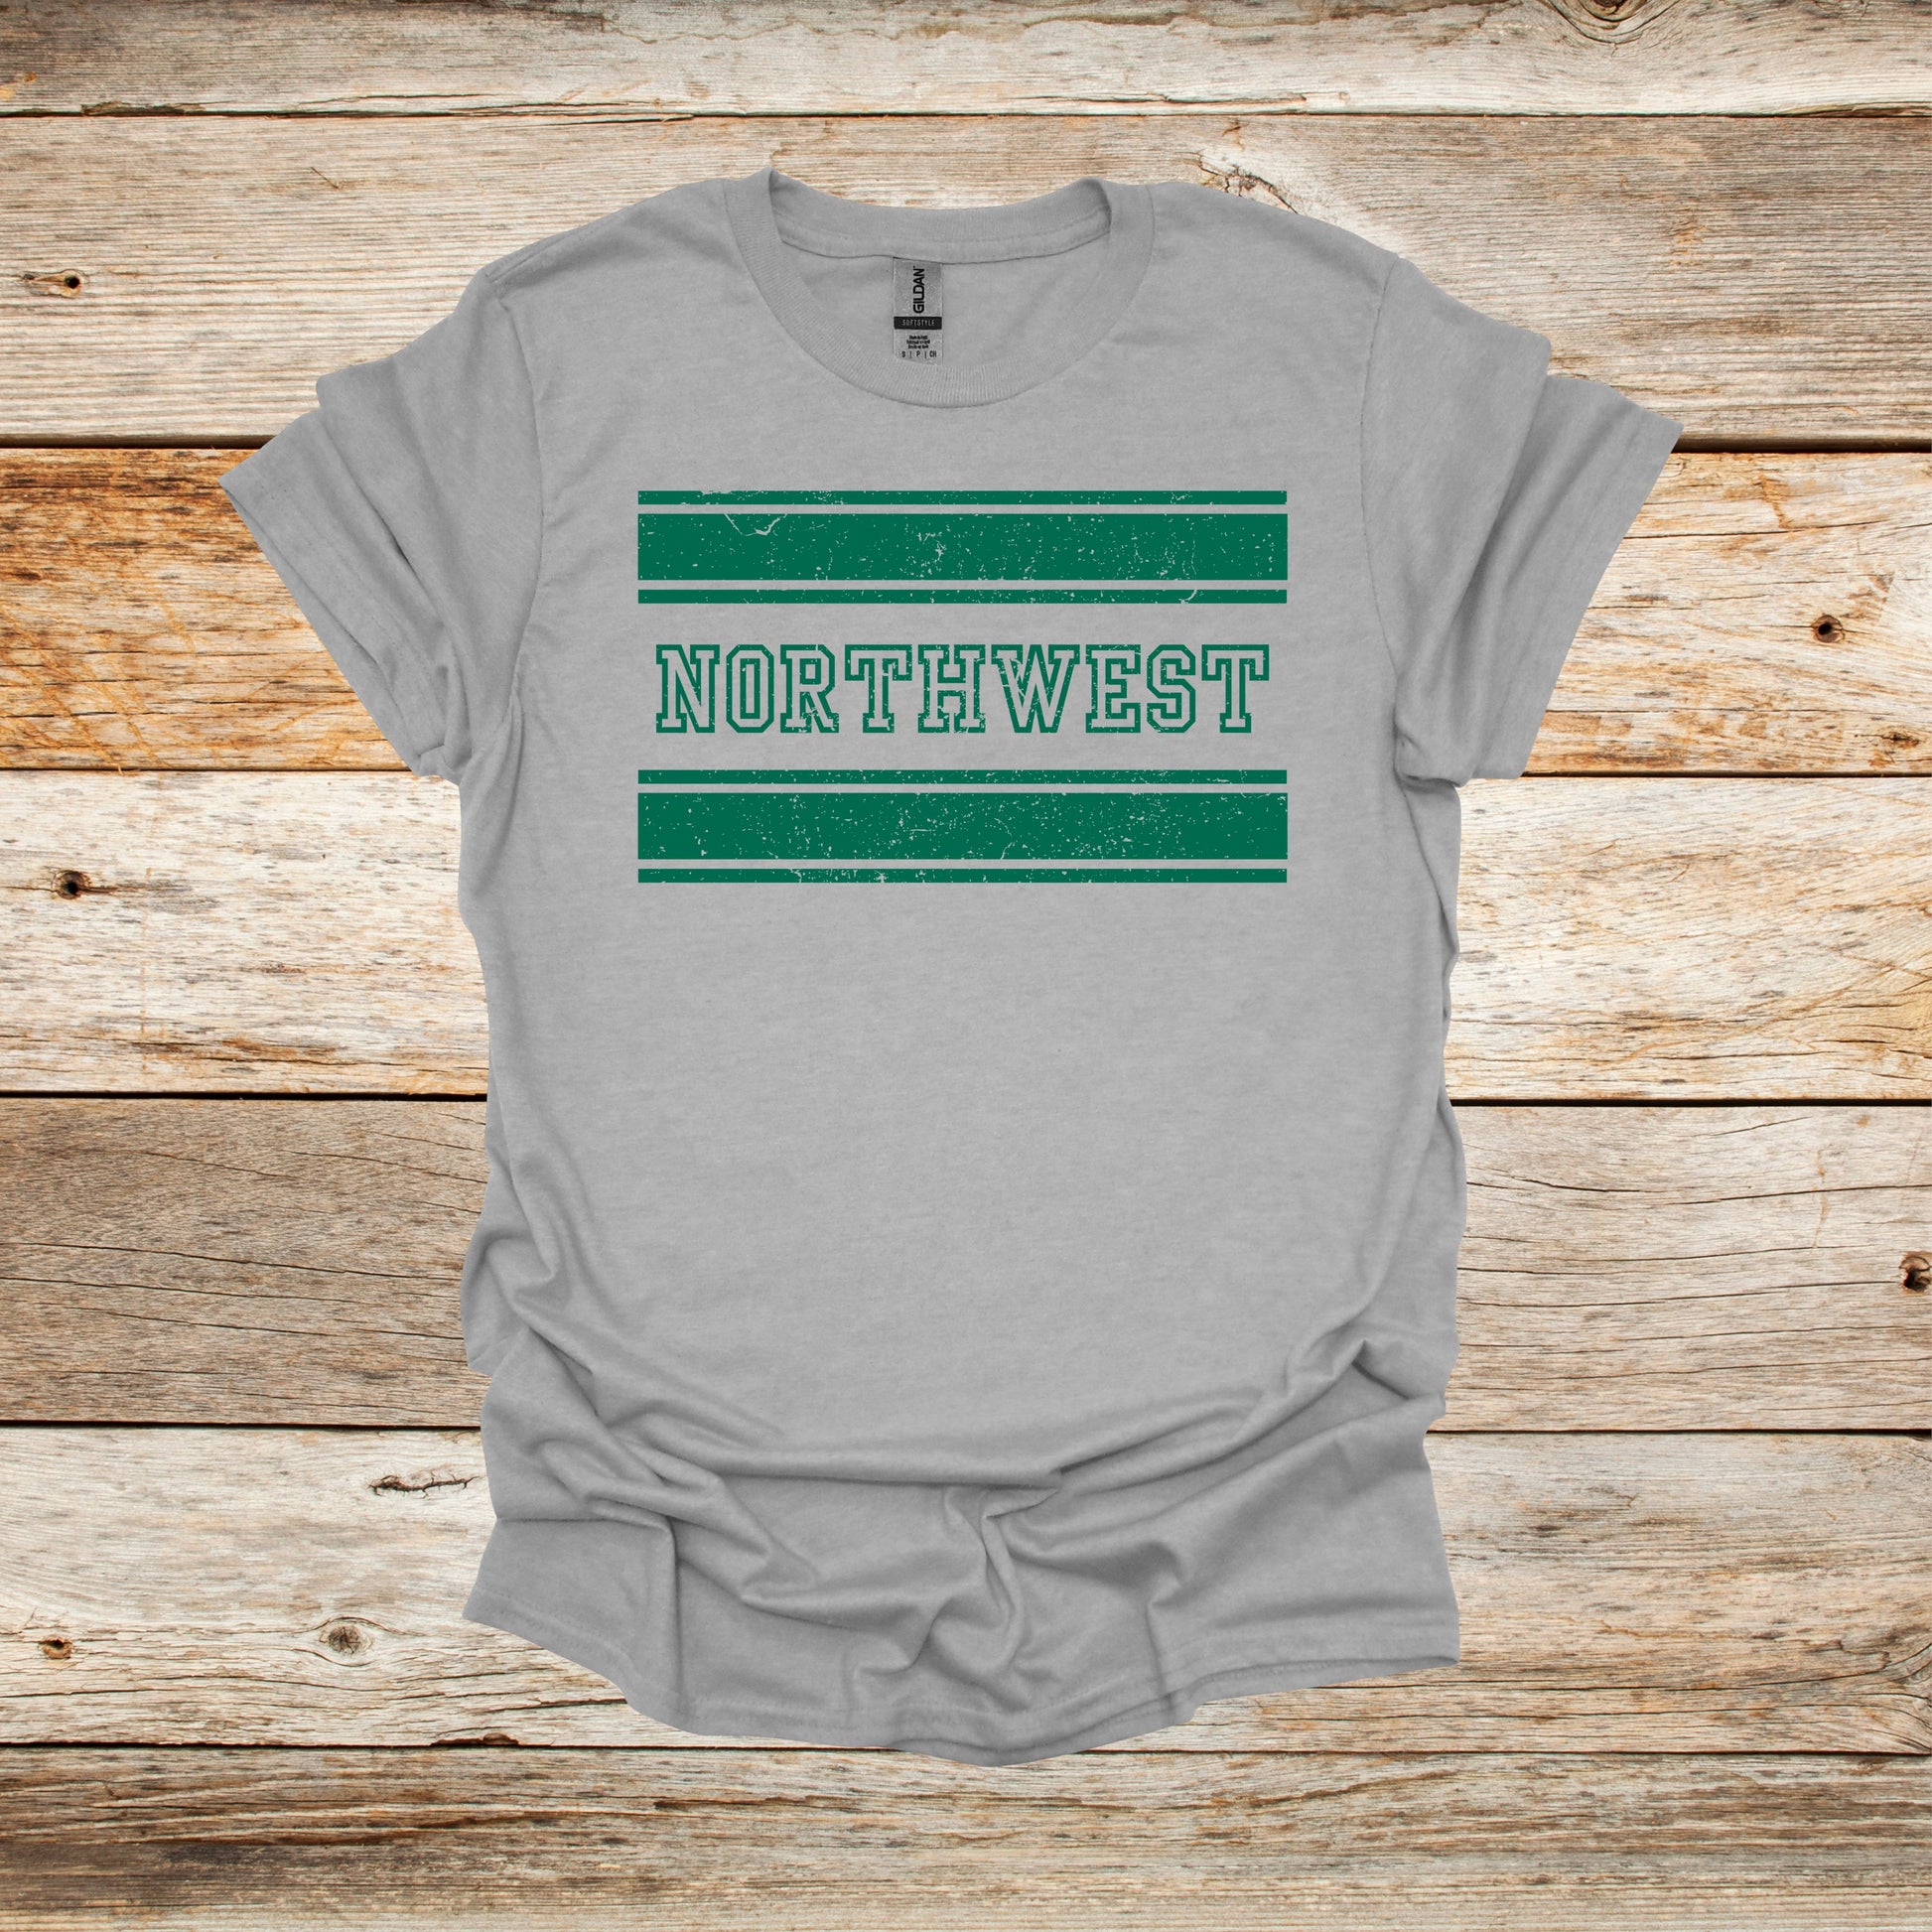 College T Shirt - Northwest Missouri State University Bearcats - Adult and Children's Tee Shirts T-Shirts Graphic Avenue Sport Grey Adult Small 